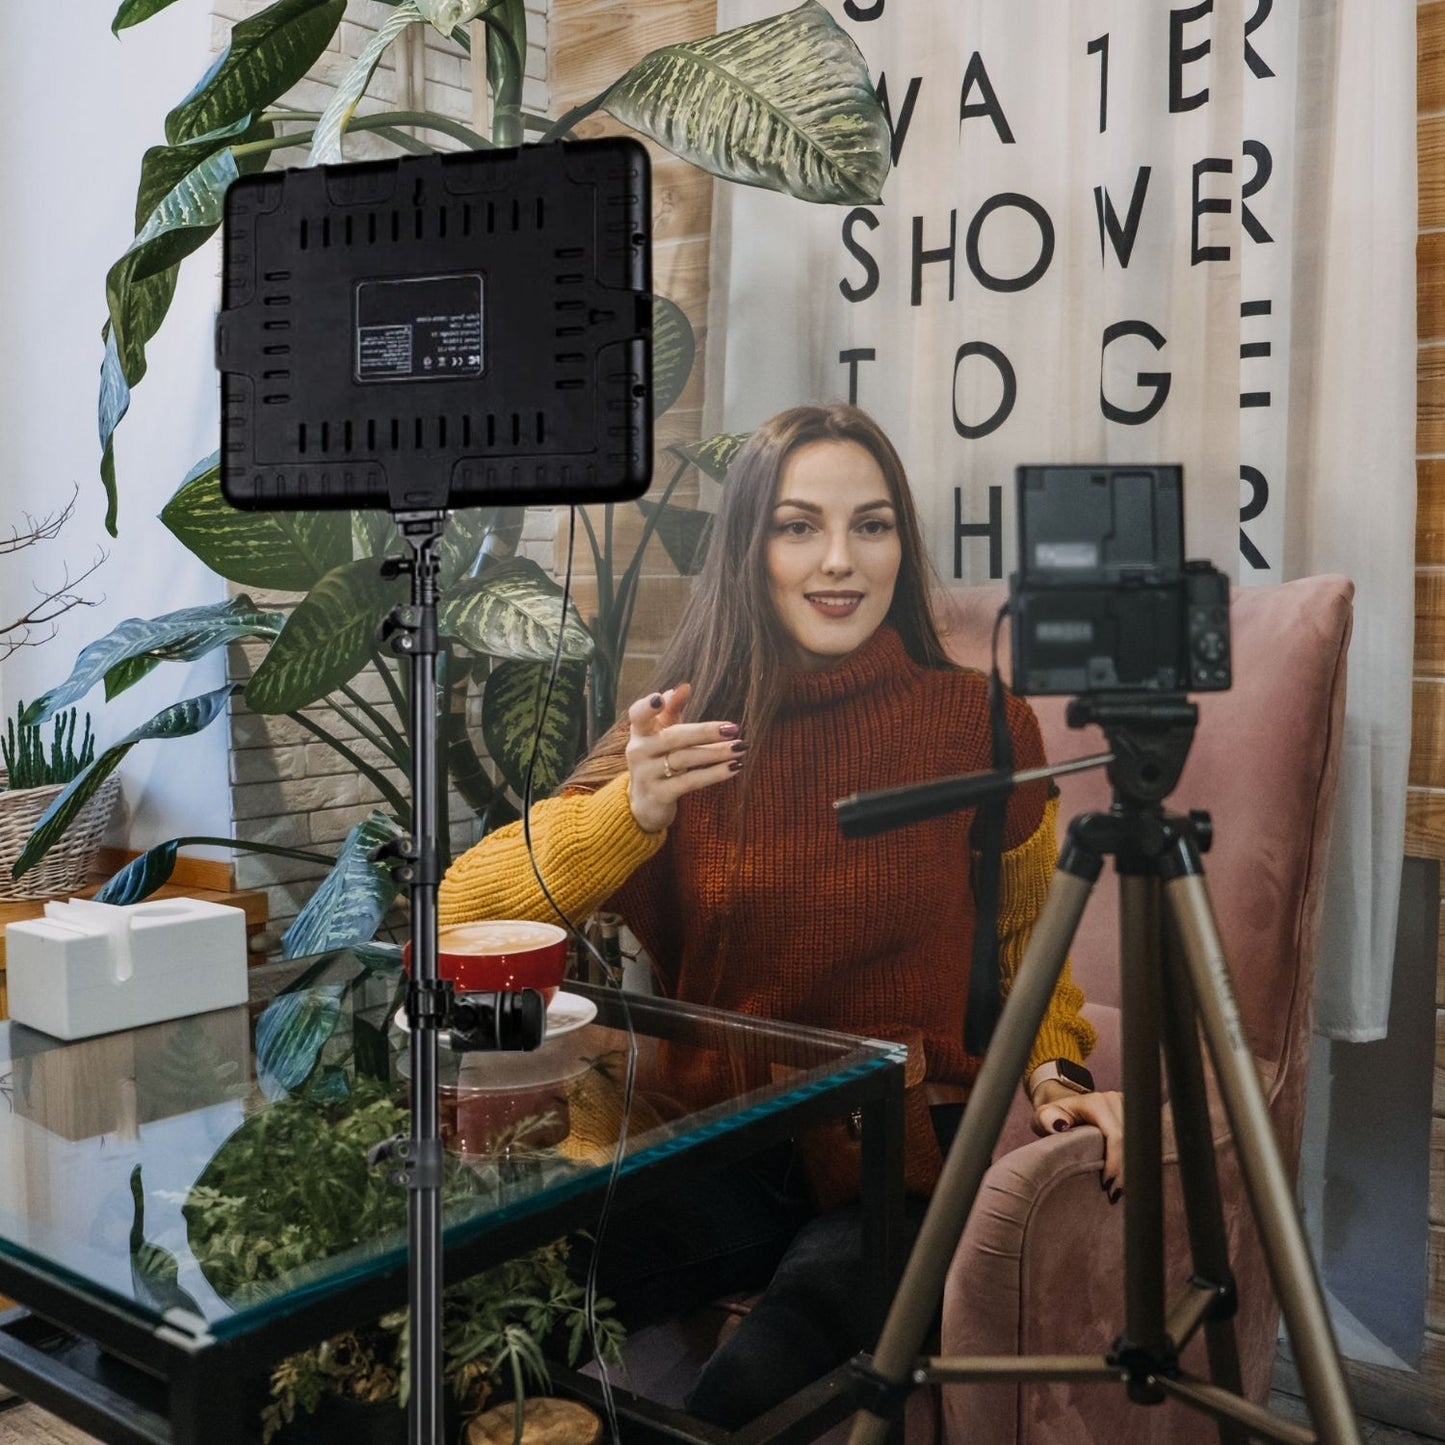 A woman use Panel light in her vlog